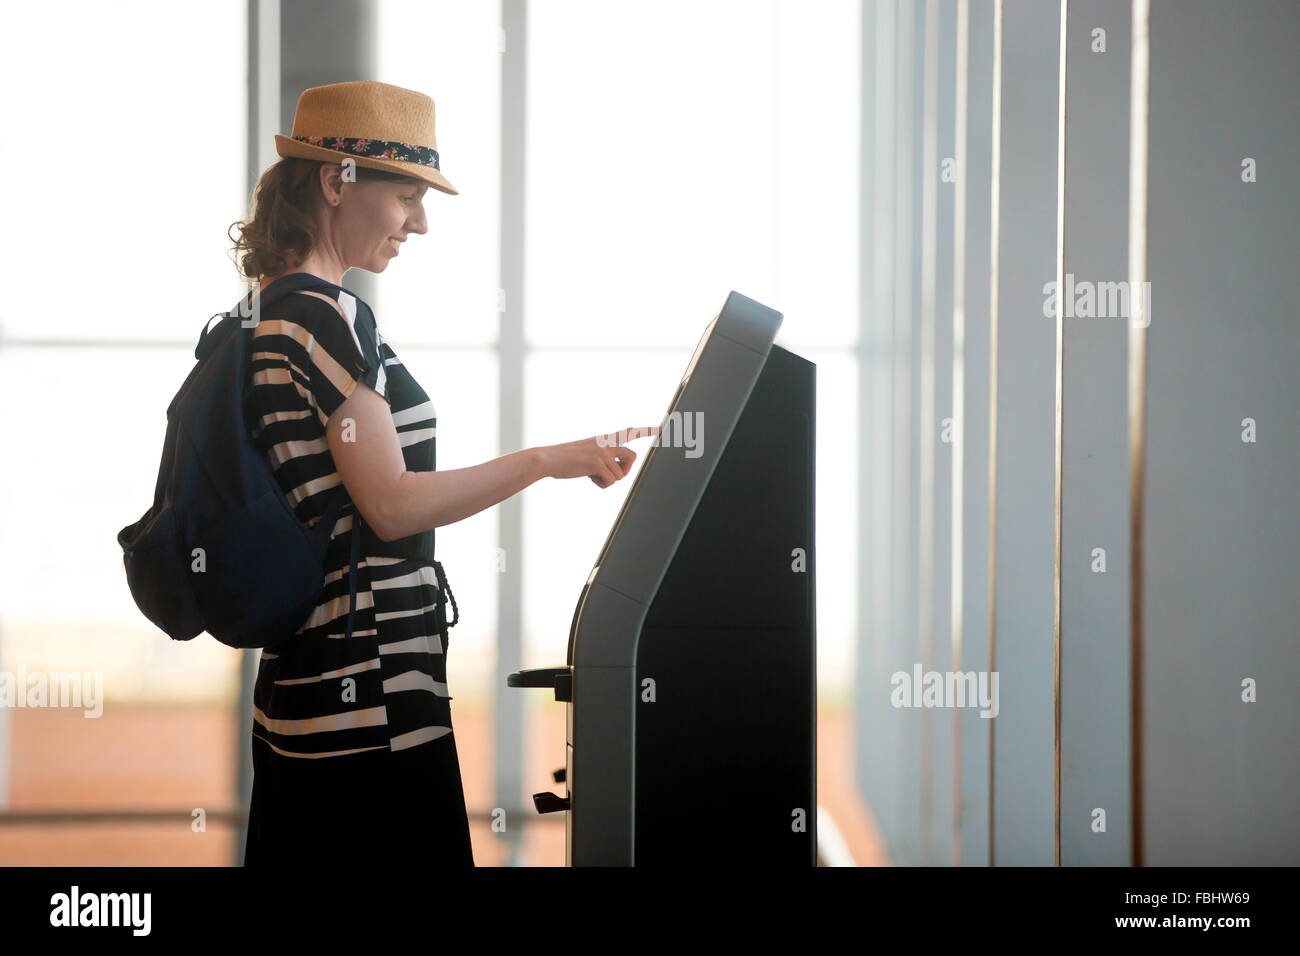 Young woman at self service transfer area doing self-check-in or buying plane tickets at automated machine with touchscreen inte Stock Photo